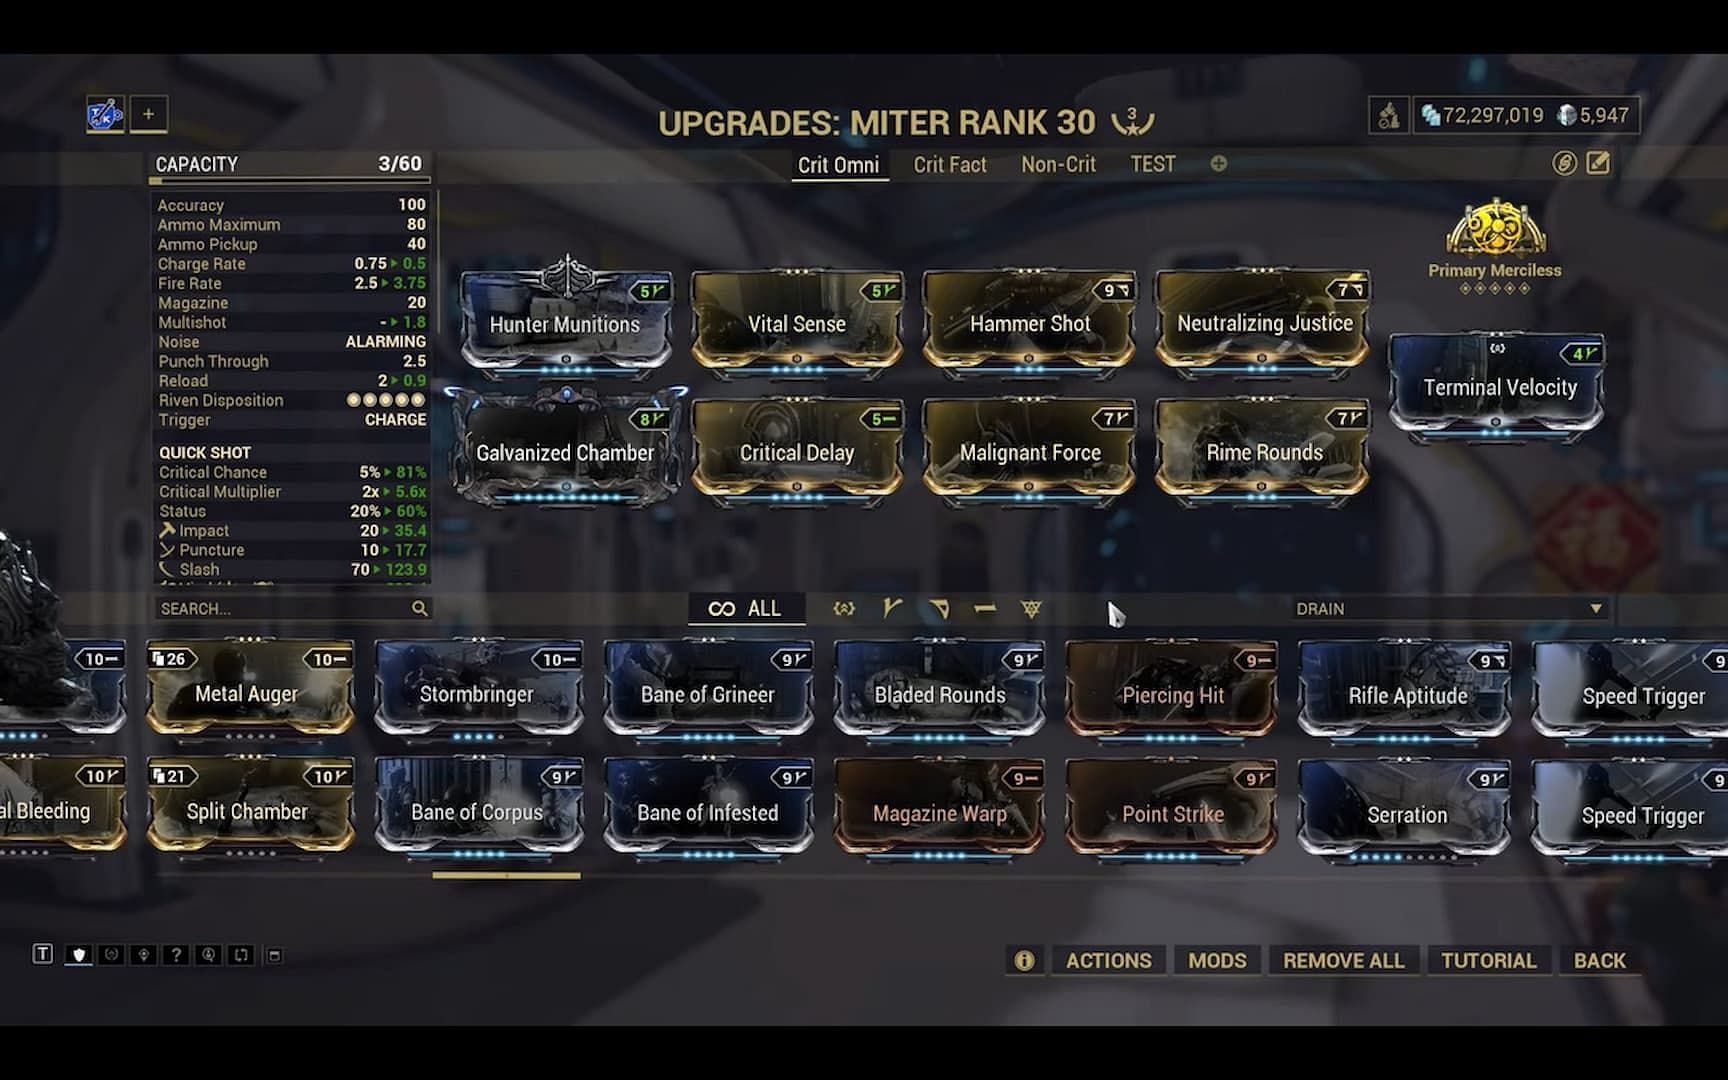 Incarnon Miter build with Neutralizing Justice for Nullifier bubbles (Image via Digital Extremes)